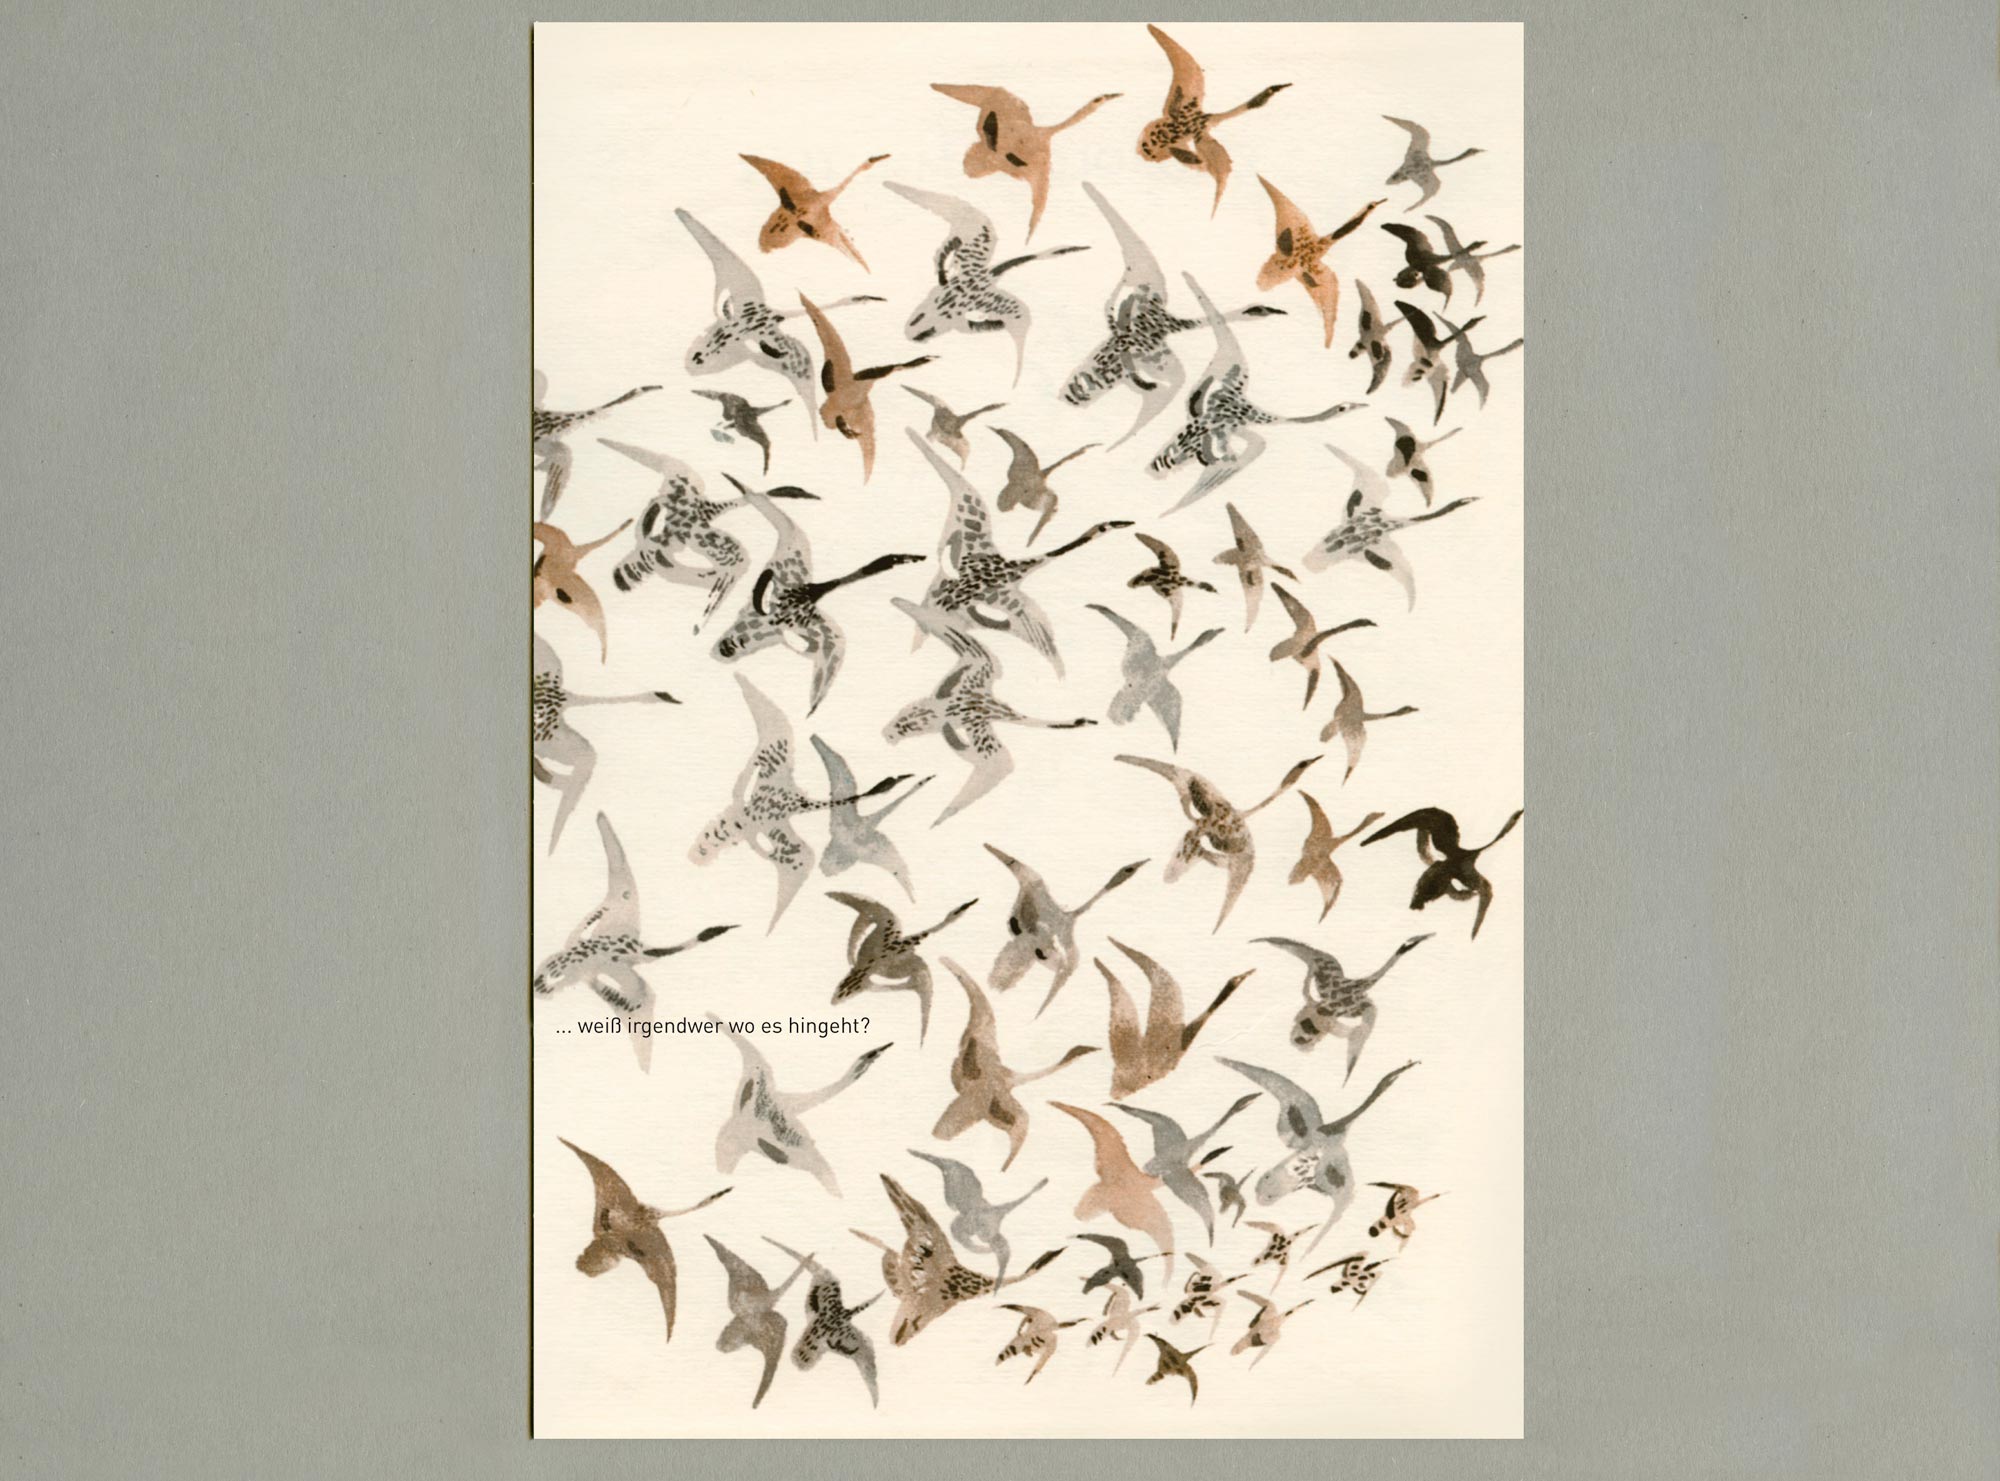 Aquarell Illustration. Swarm of various birds with small text inbetween.